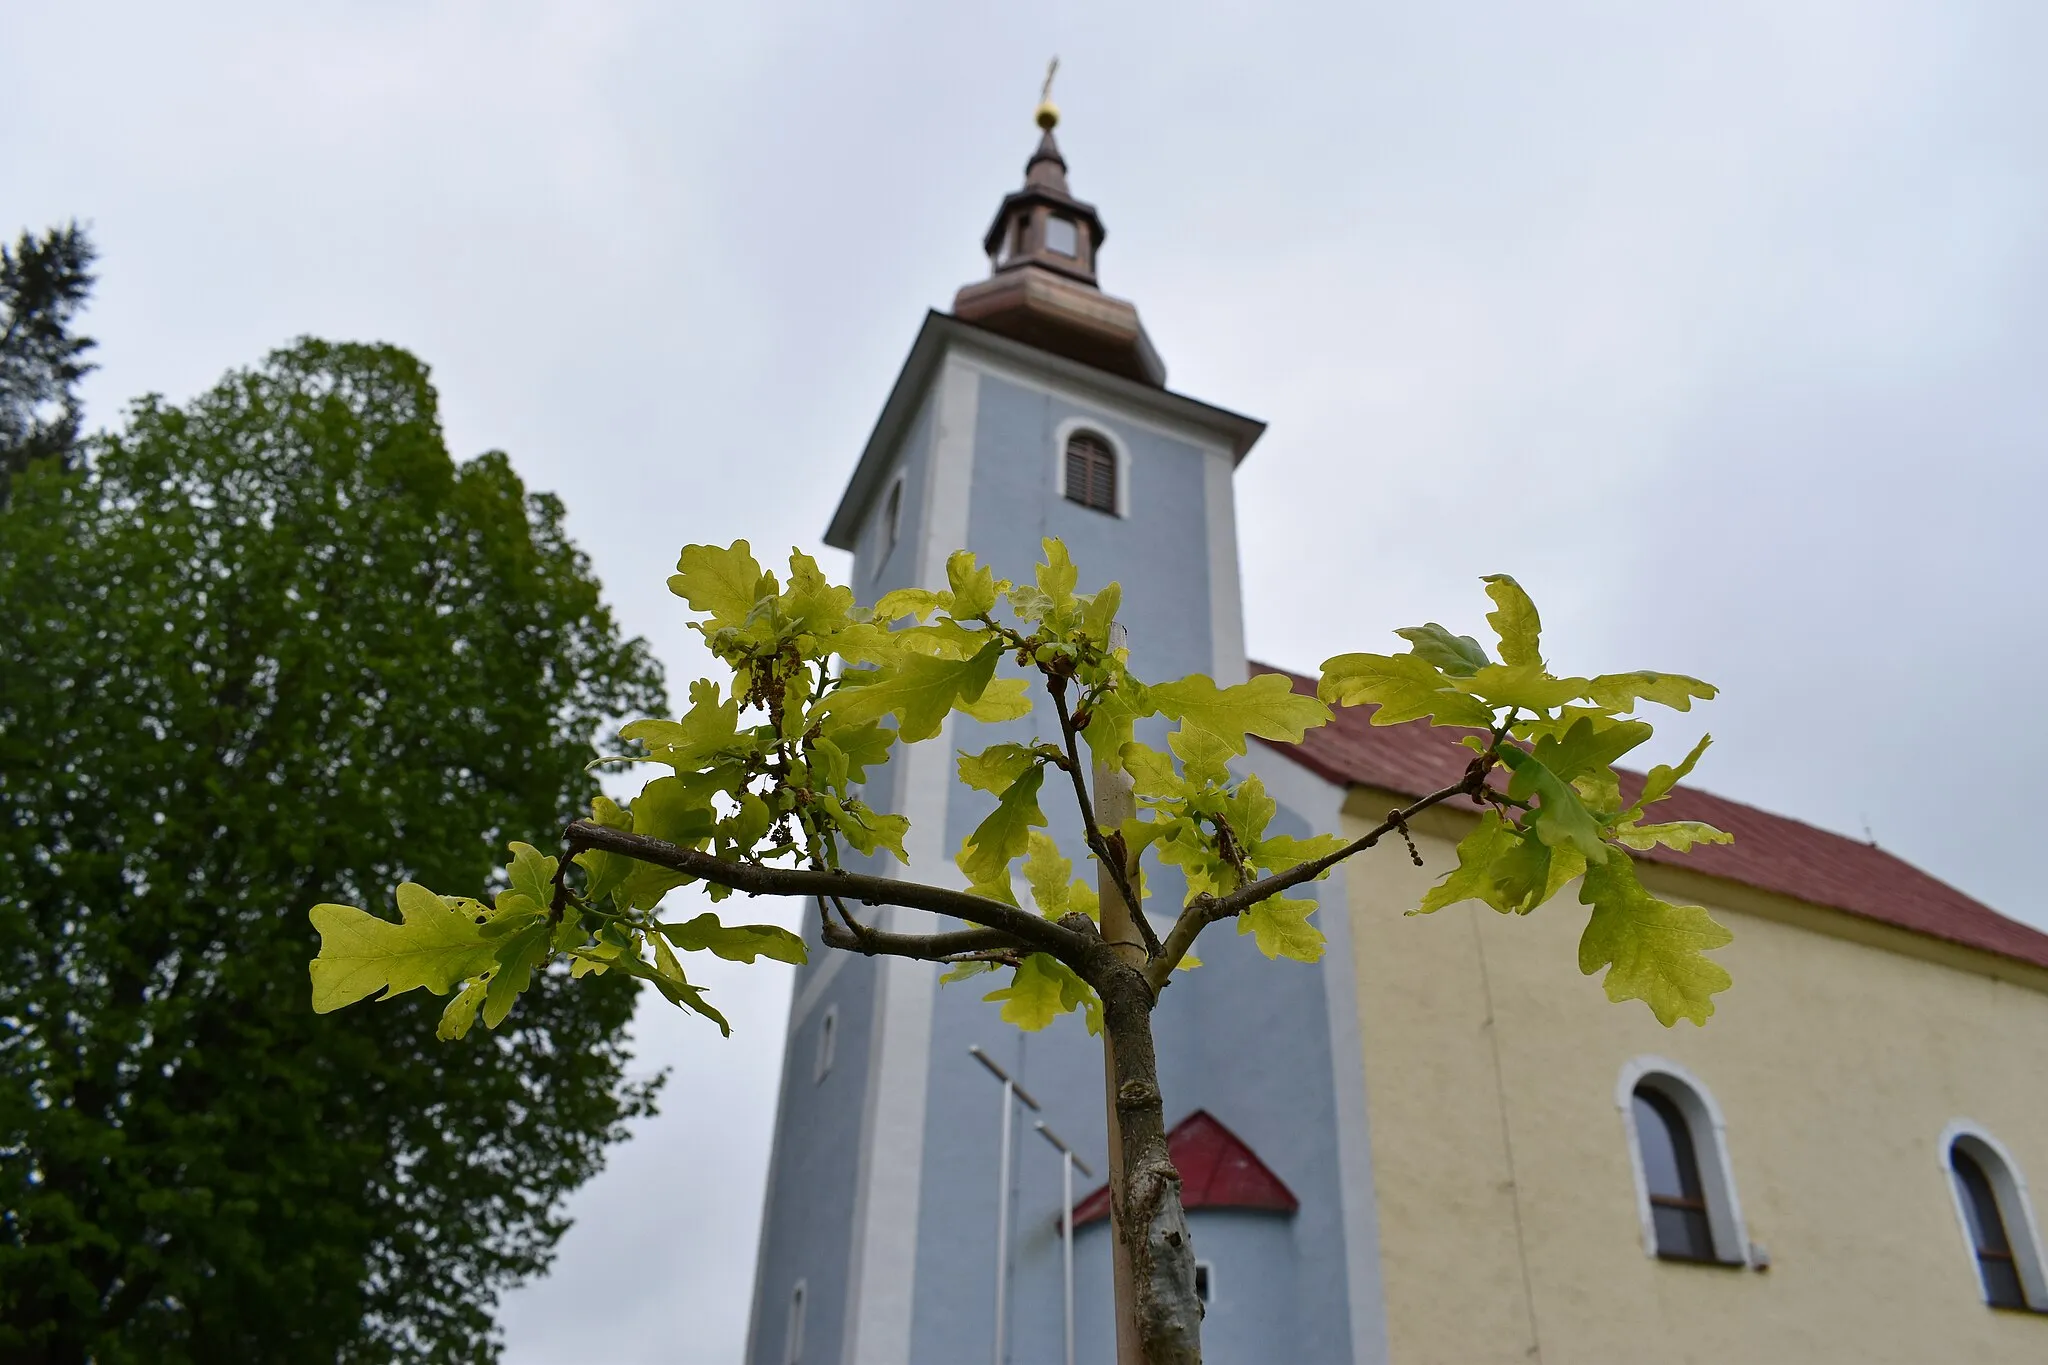 Photo showing: COVID-19 Tree of Peace in Vysoká nad Kysucou village (Slovakia). The Roman Catholic Church of St. Matthew in the background